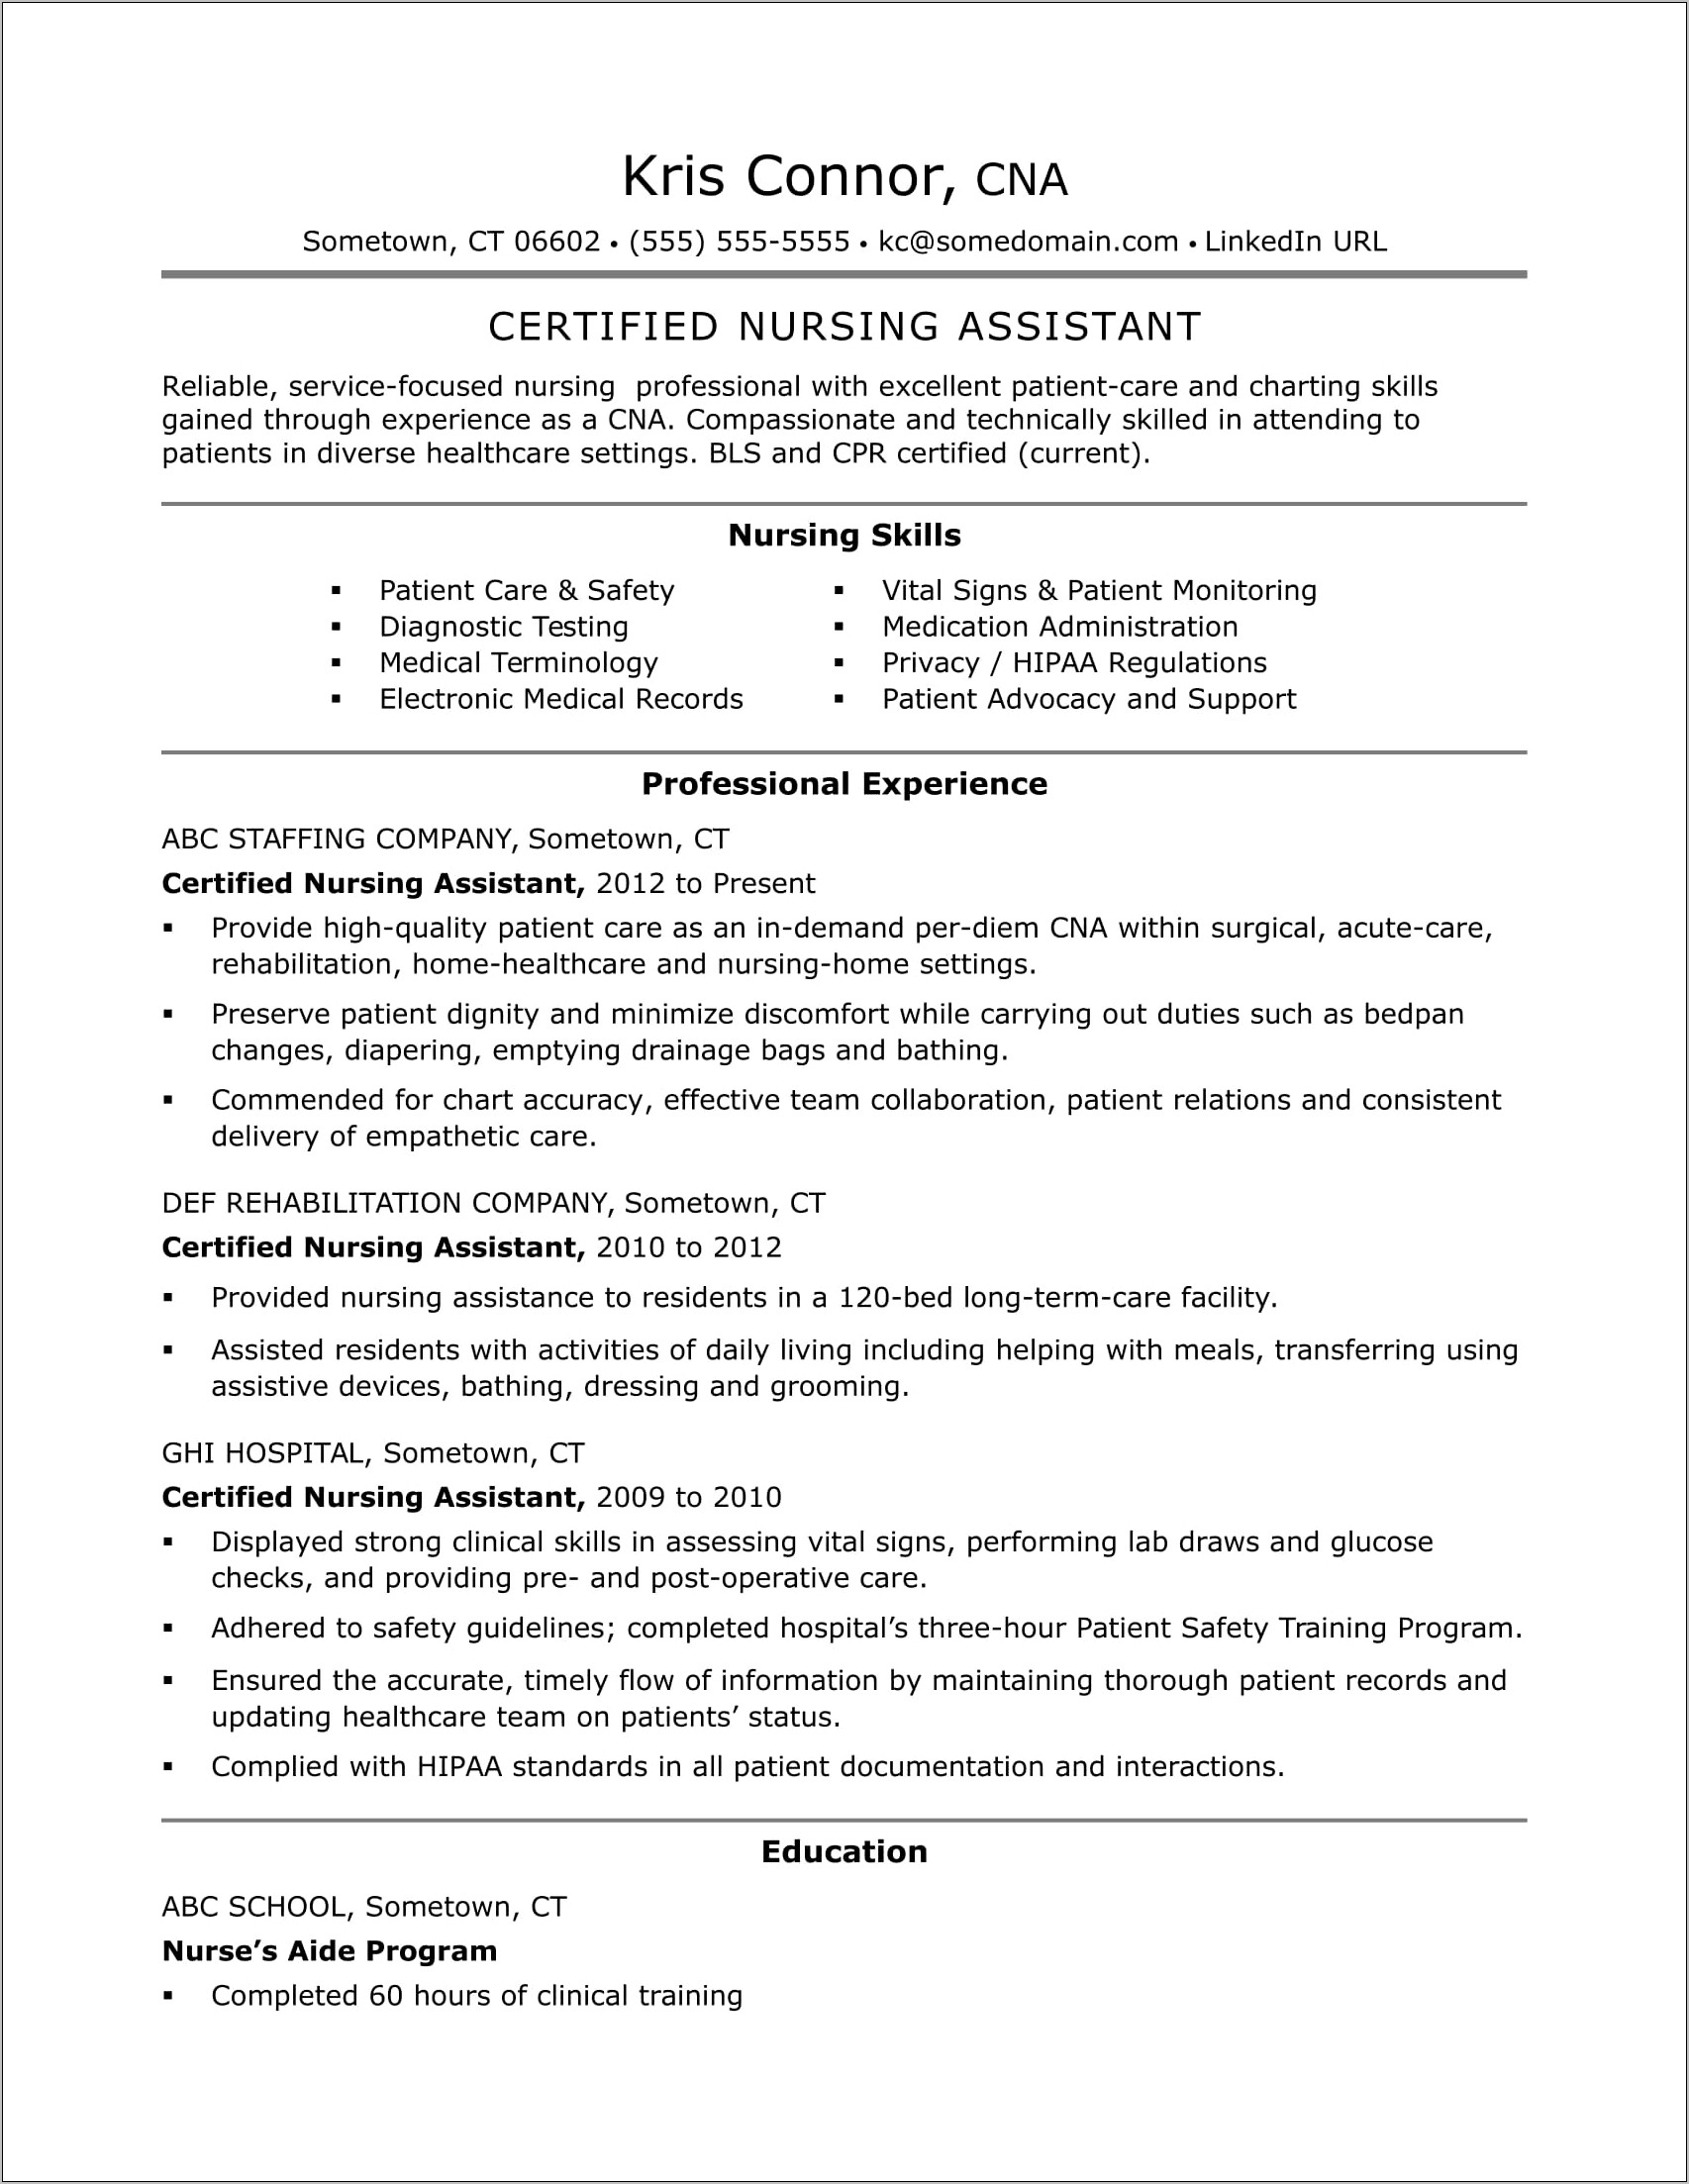 Sample Testing Resume With Healthcare Experience